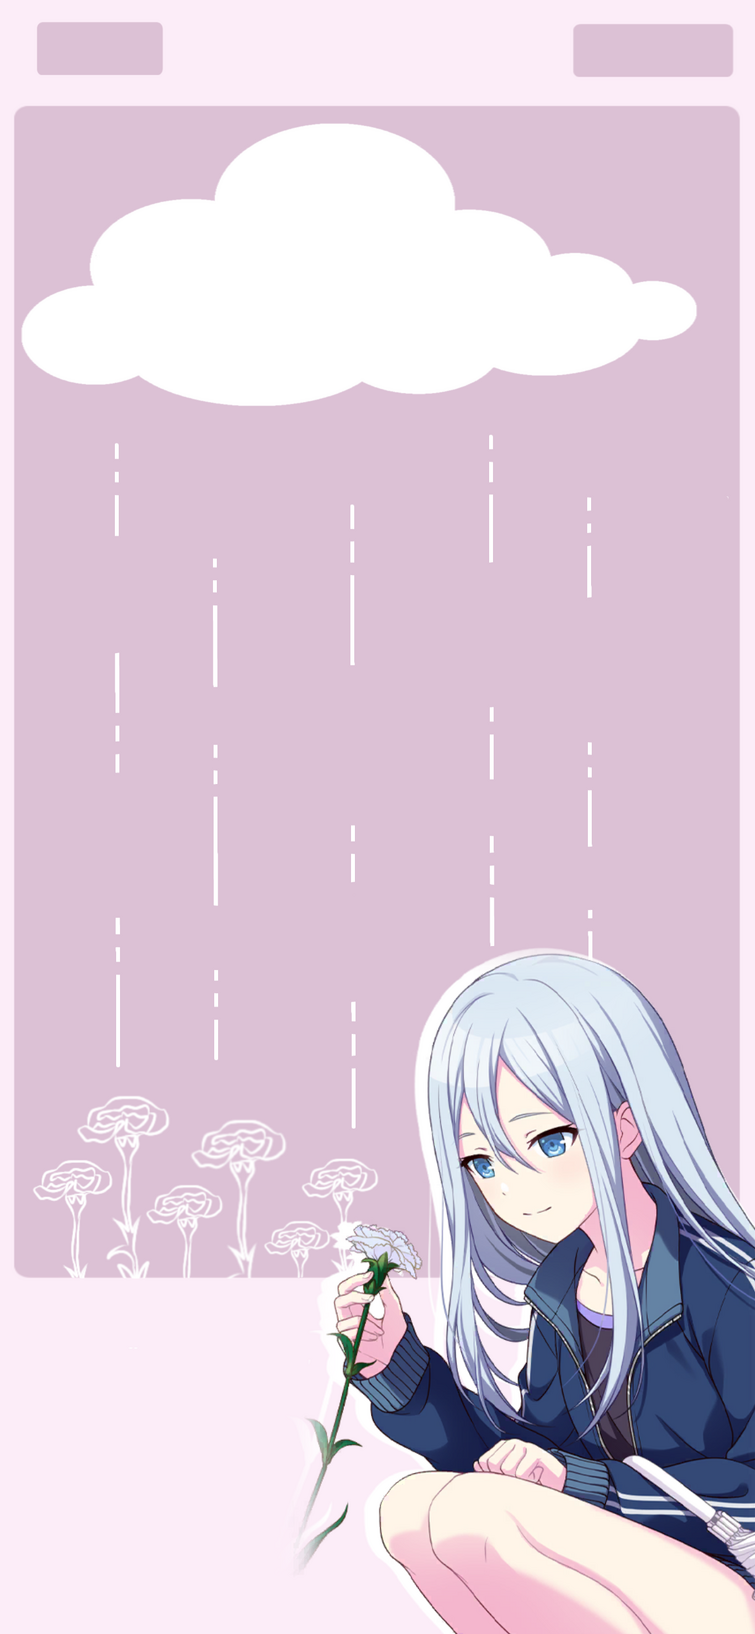 I Made Some Carnation Recollection iPhone Wallpaper!